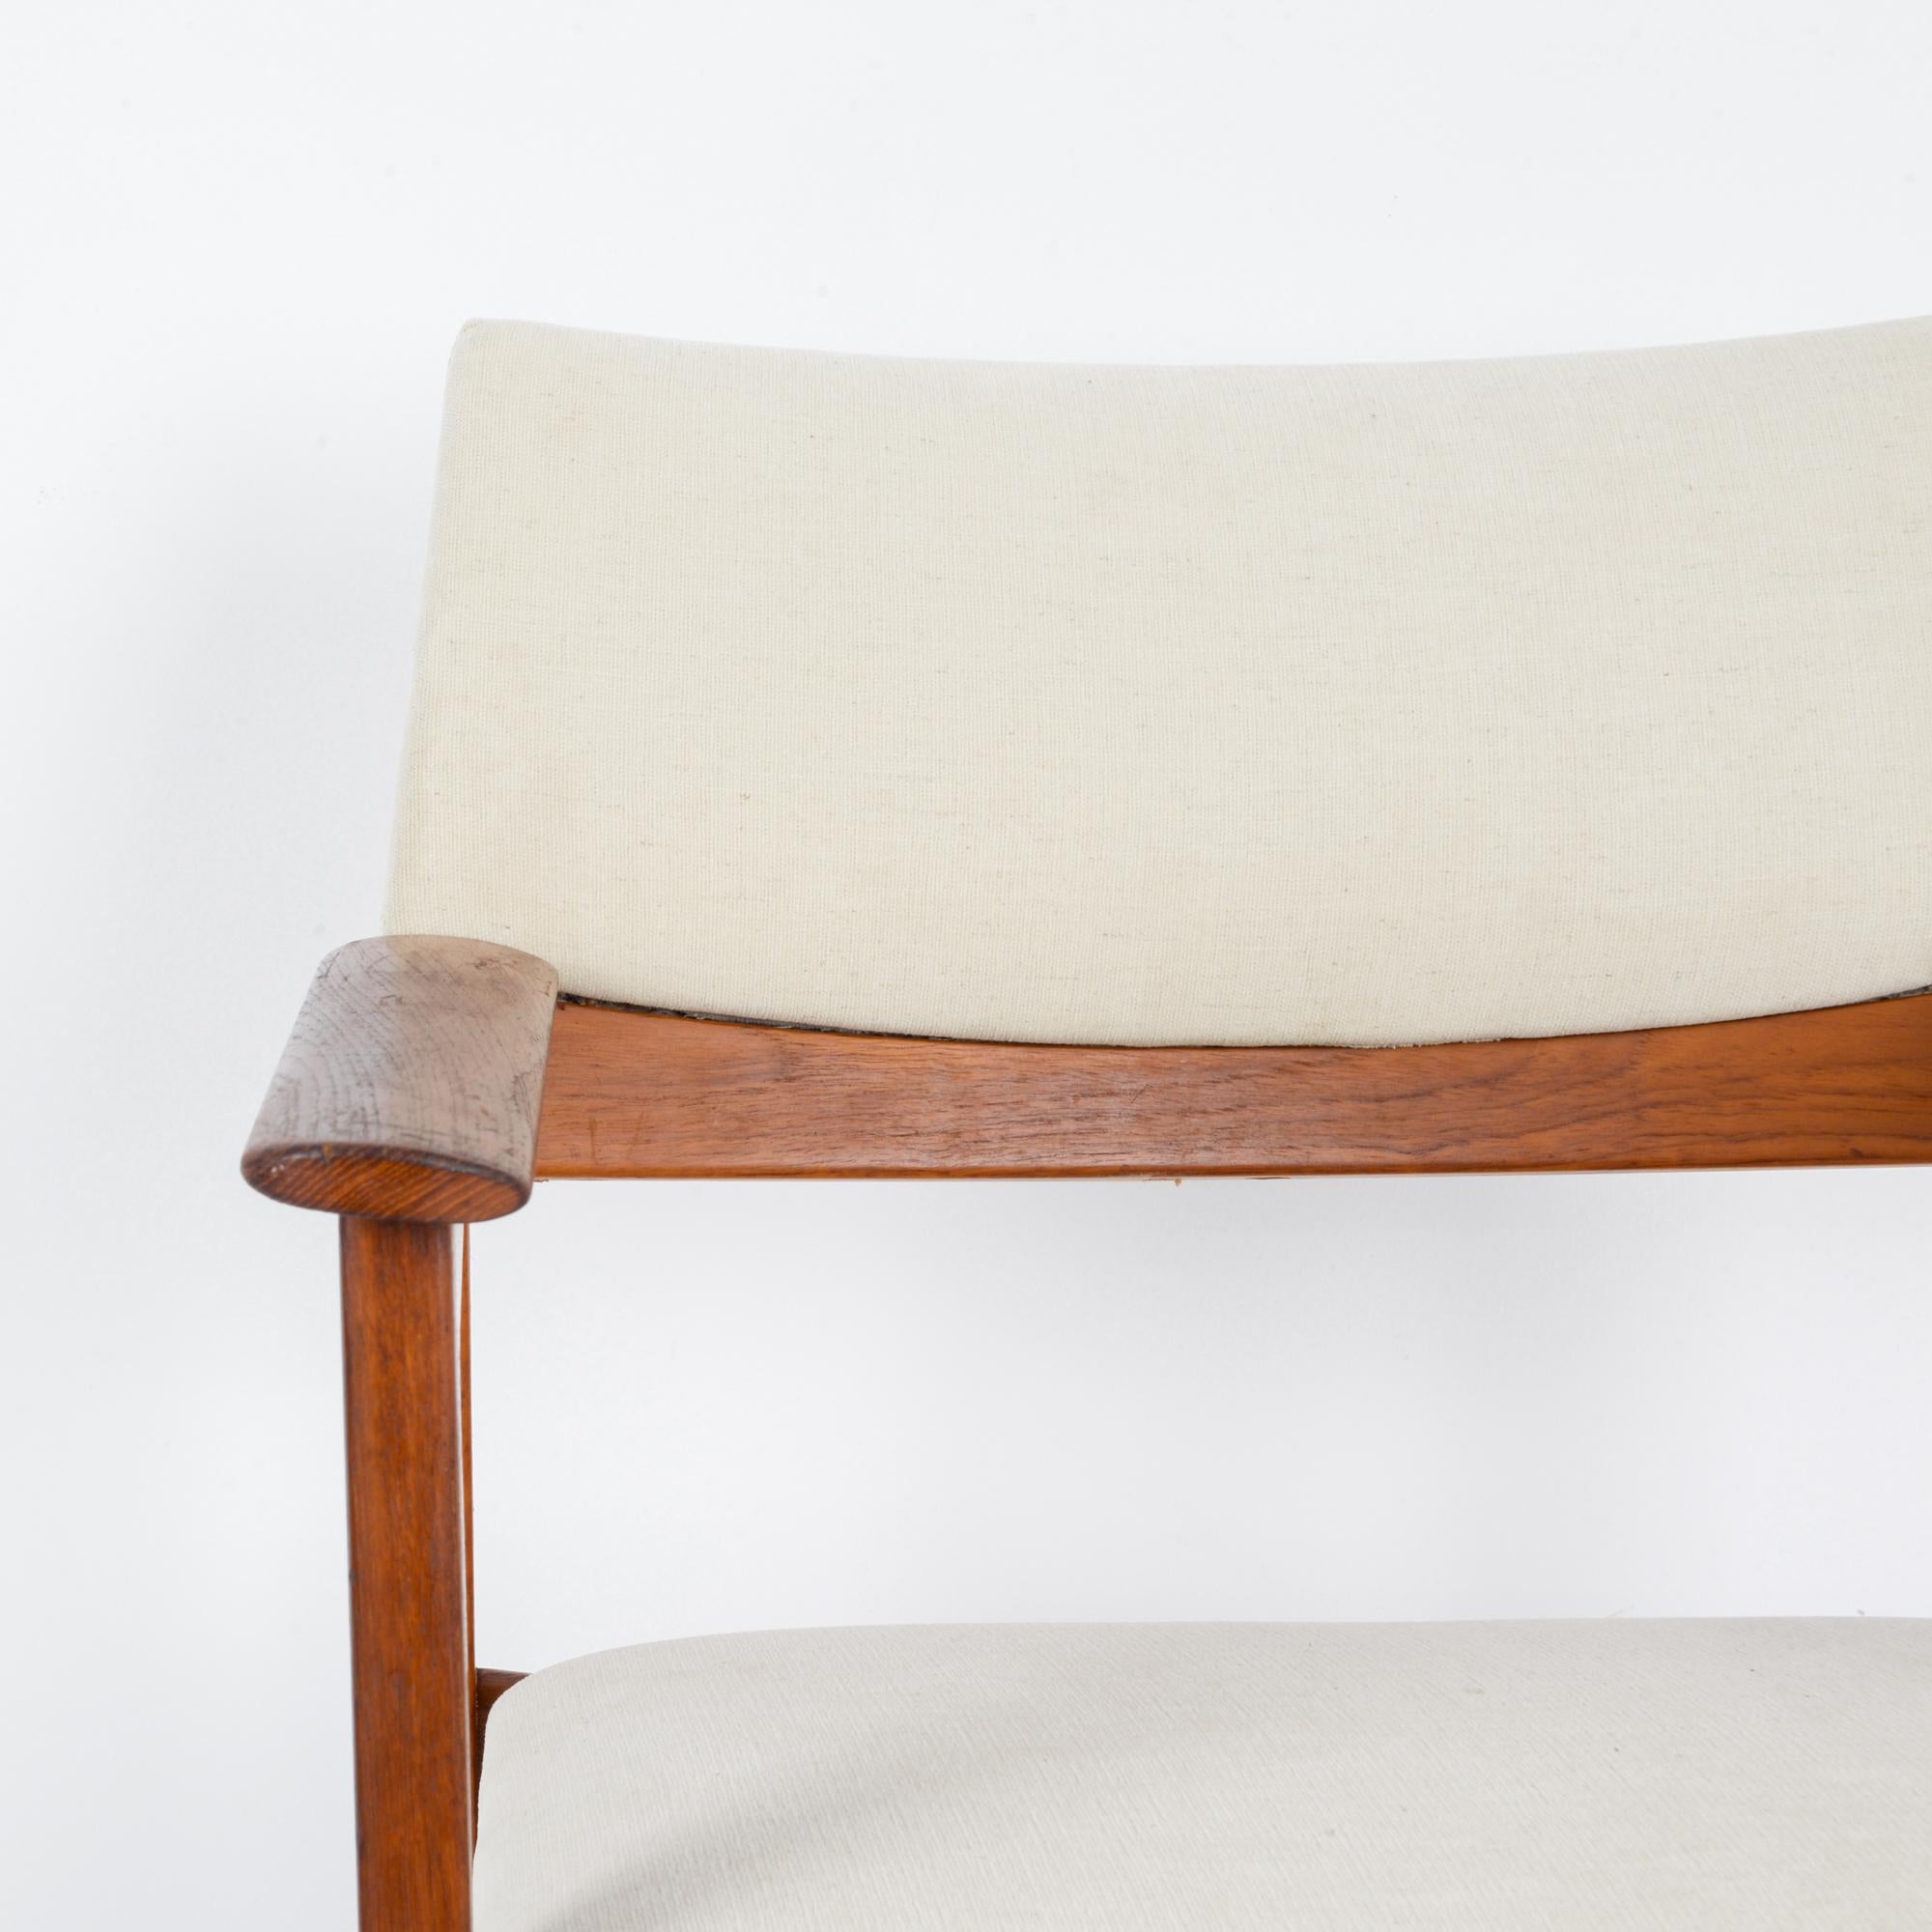 Upholstery 1960s Danish Wooden Armchair with Upholstered Seat and Back For Sale